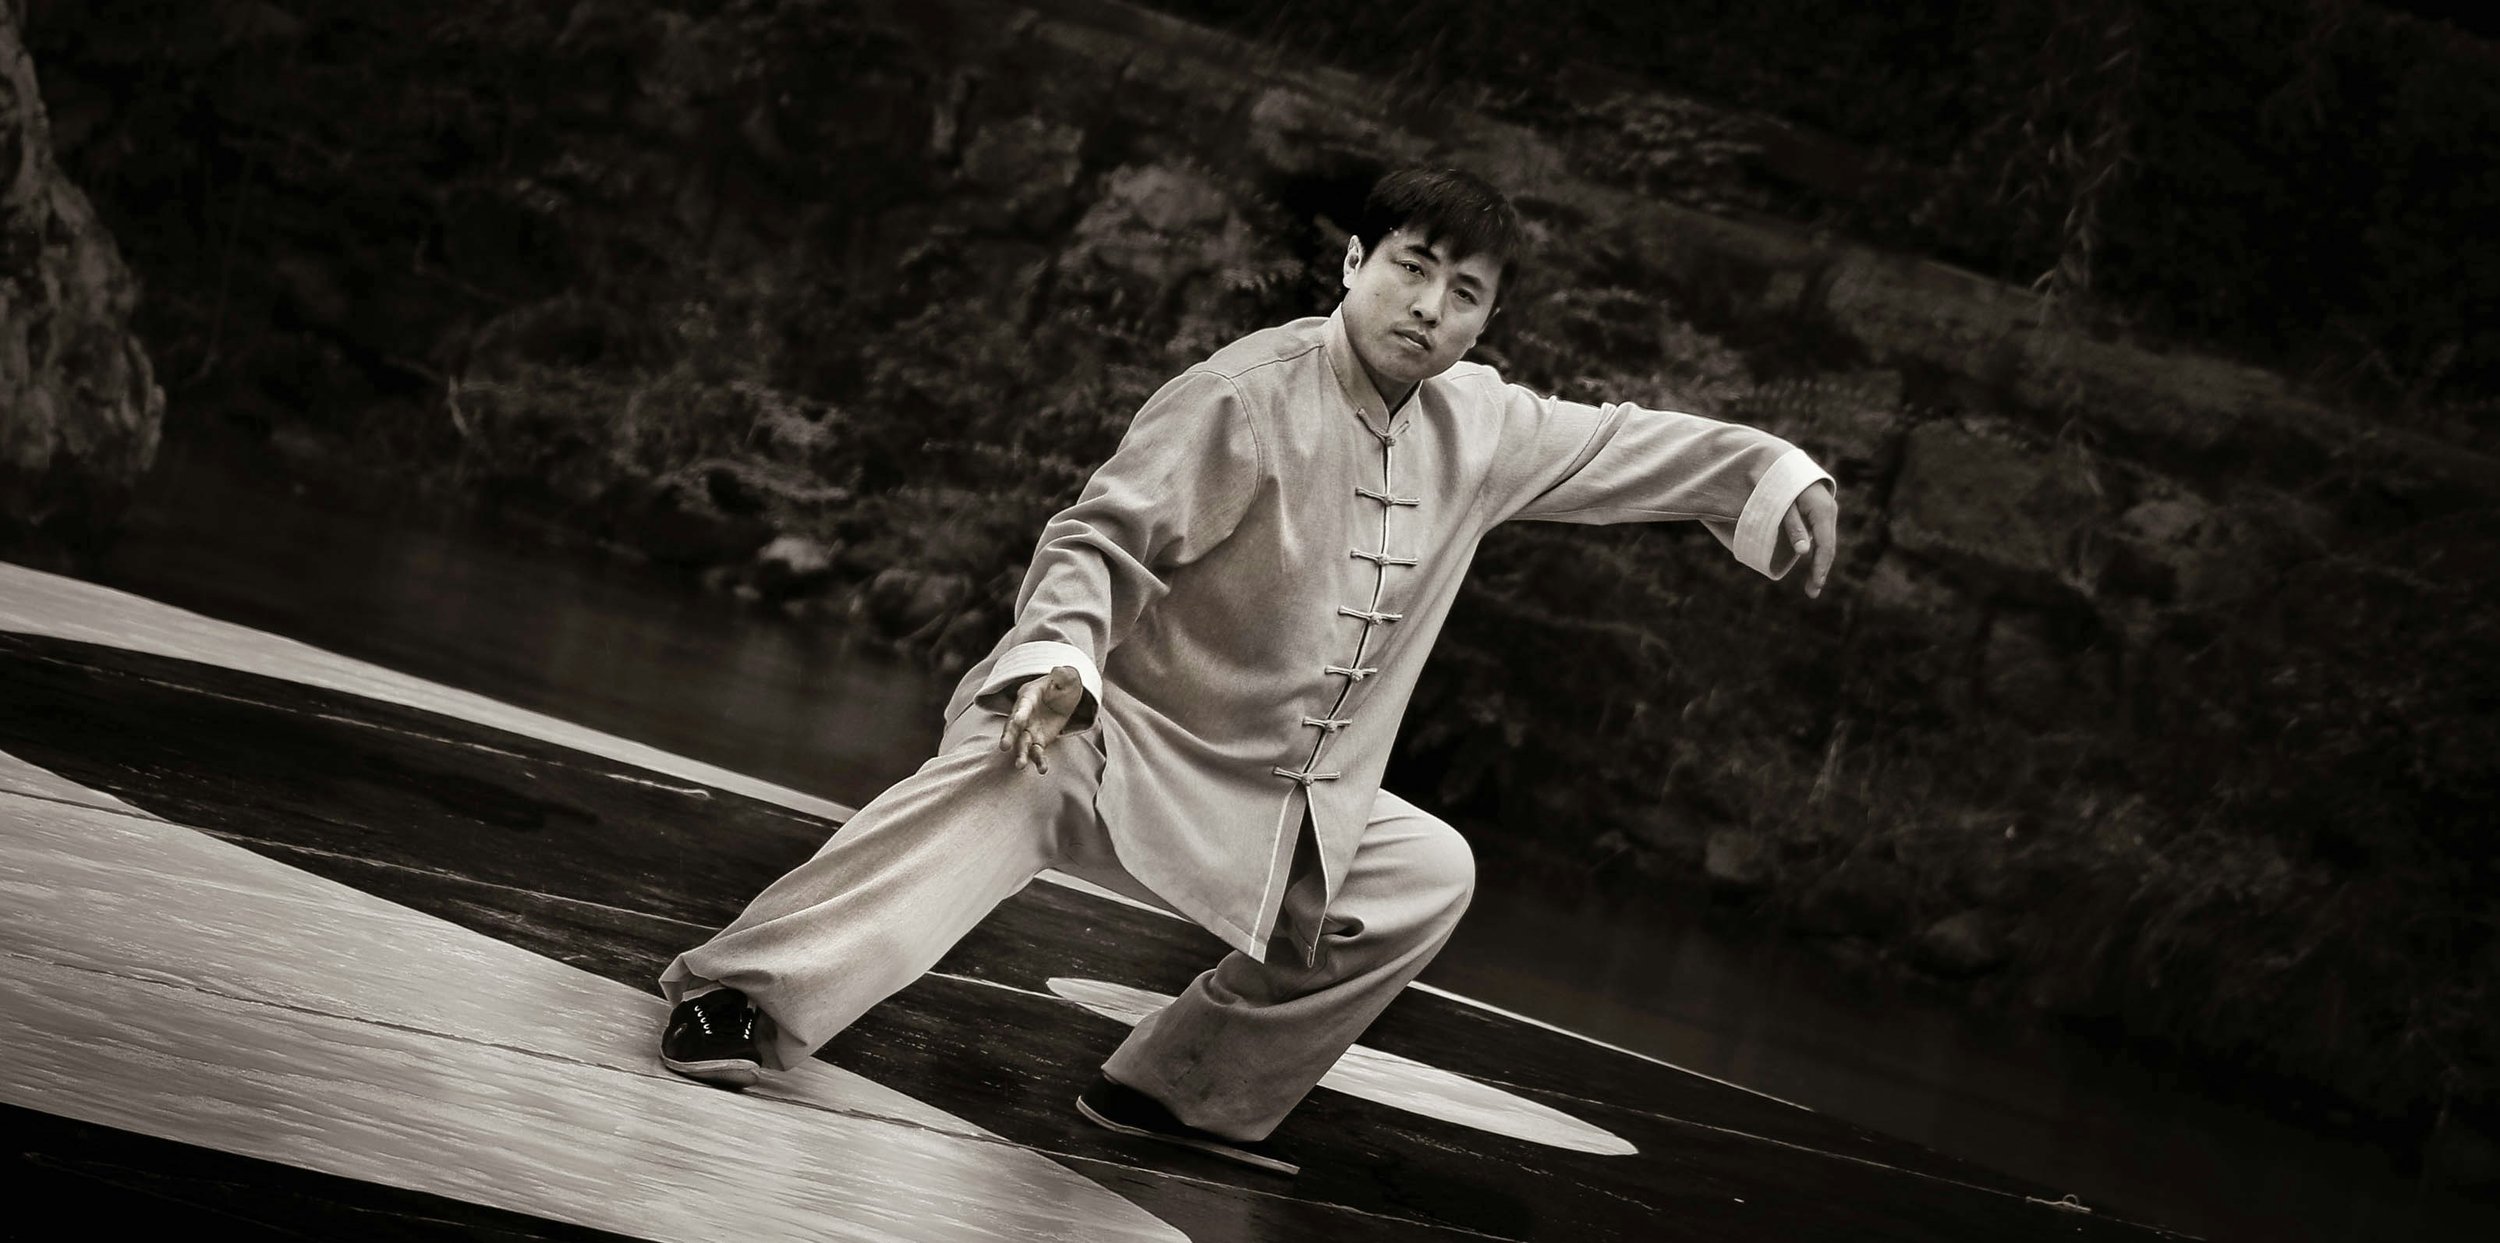 Tai chi is better at reducing blood pressure than aerobic exercise